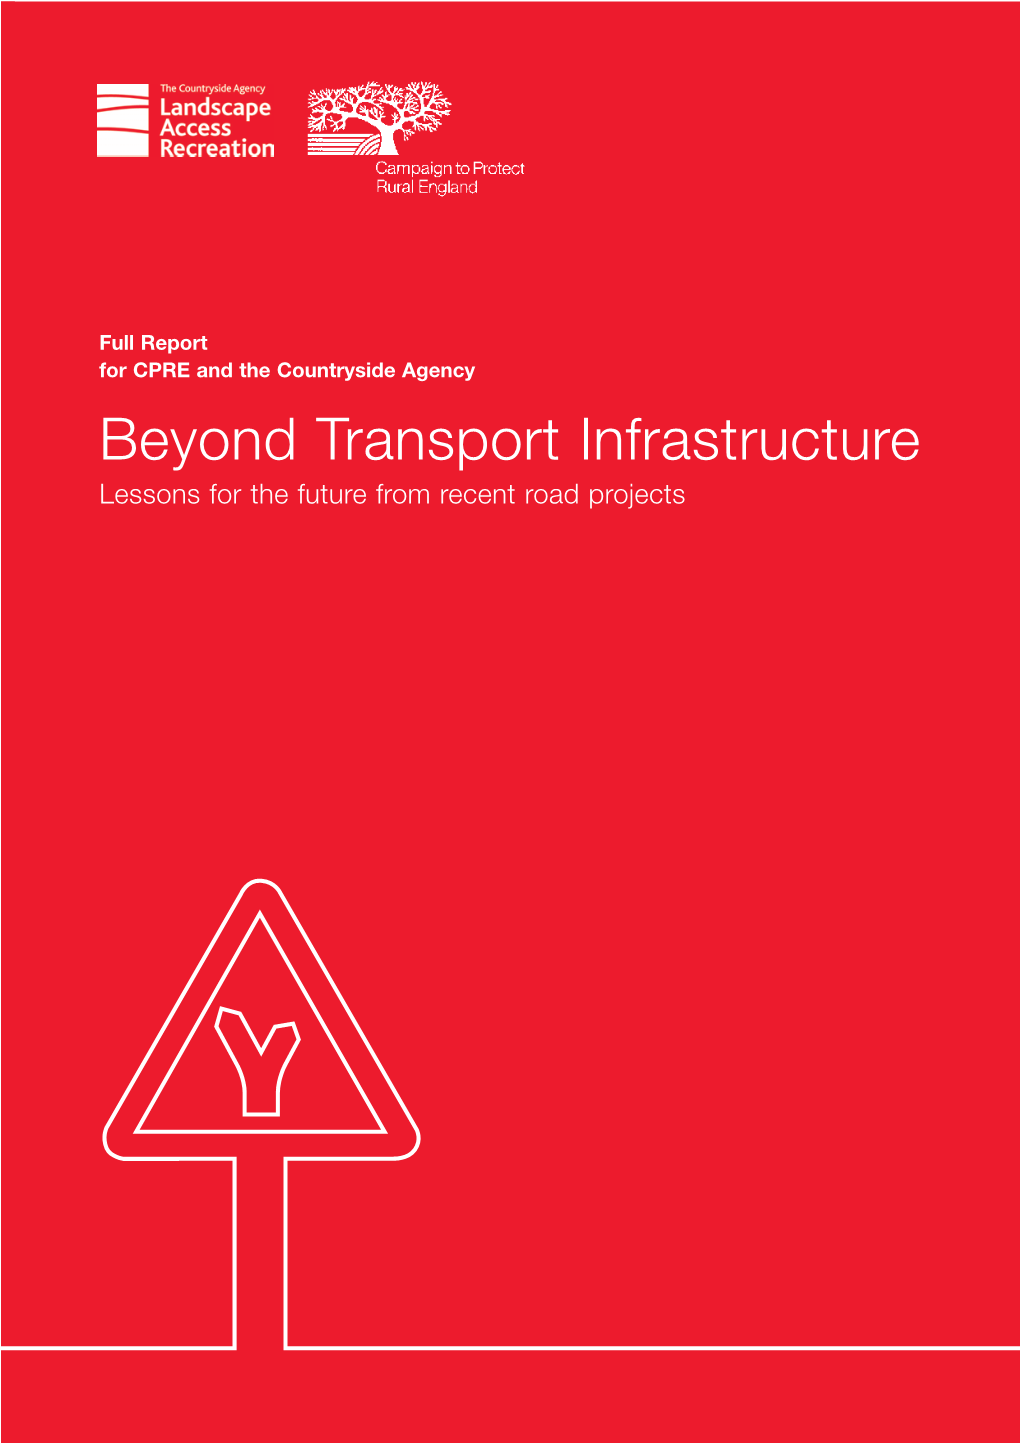 Beyond Transport Infrastructure: Lessons for the Future from Recent Road Projects